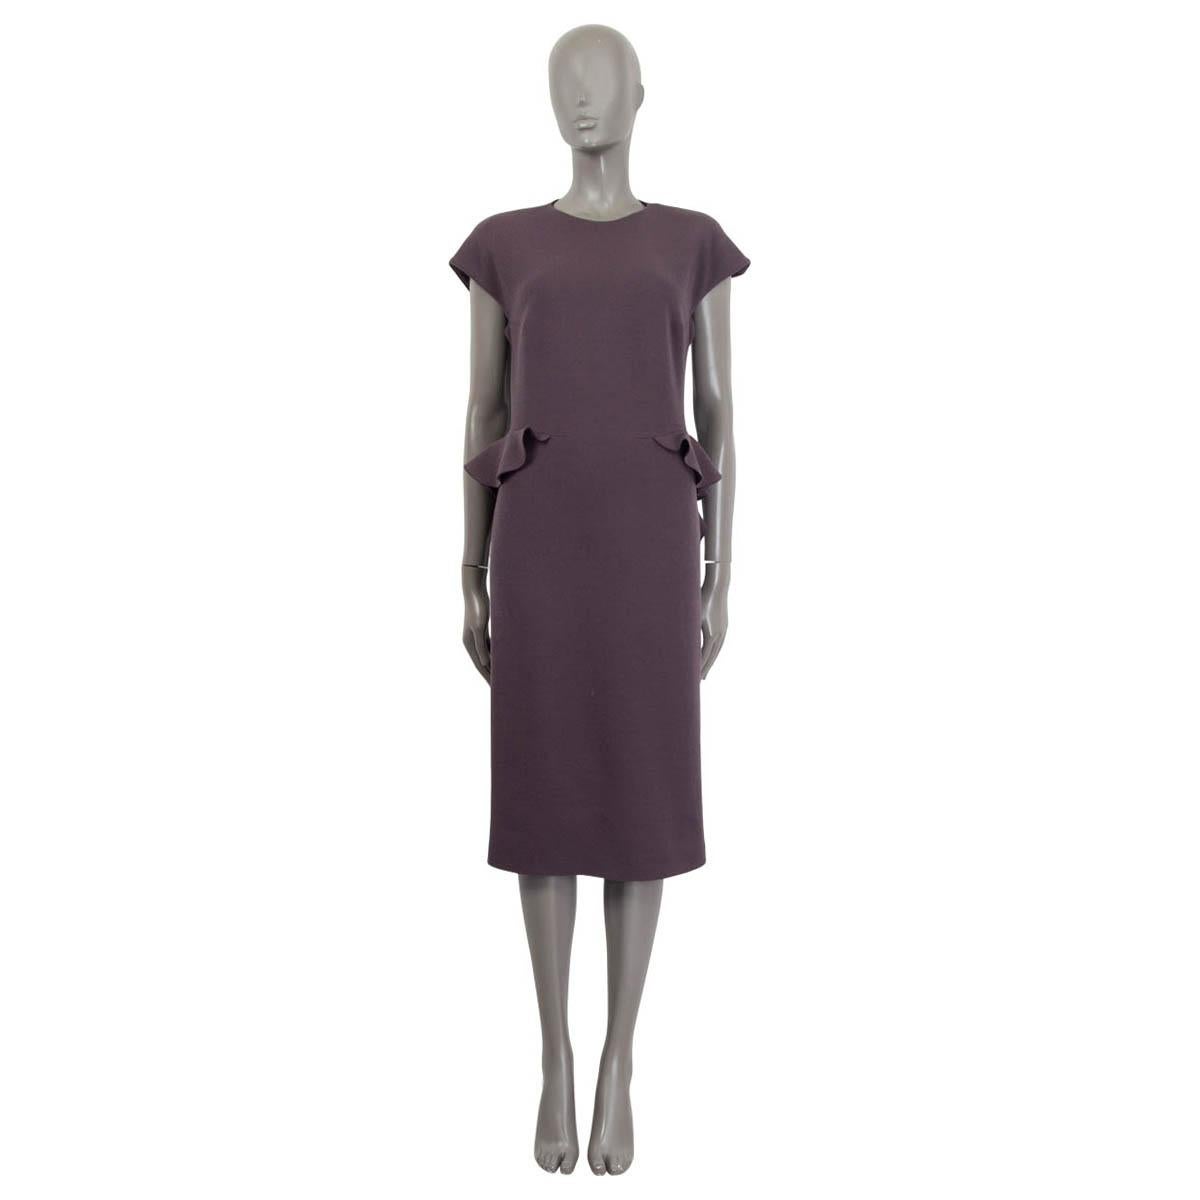 100% authentic Bottega Veneta short sleeve dress in eggplant wool (100%). Features rushed details at the front waist and the back. Opens with a concealed zipper and a hook at the back. Lined in eggplant silk (93%) and elastane (7%). Has been worn